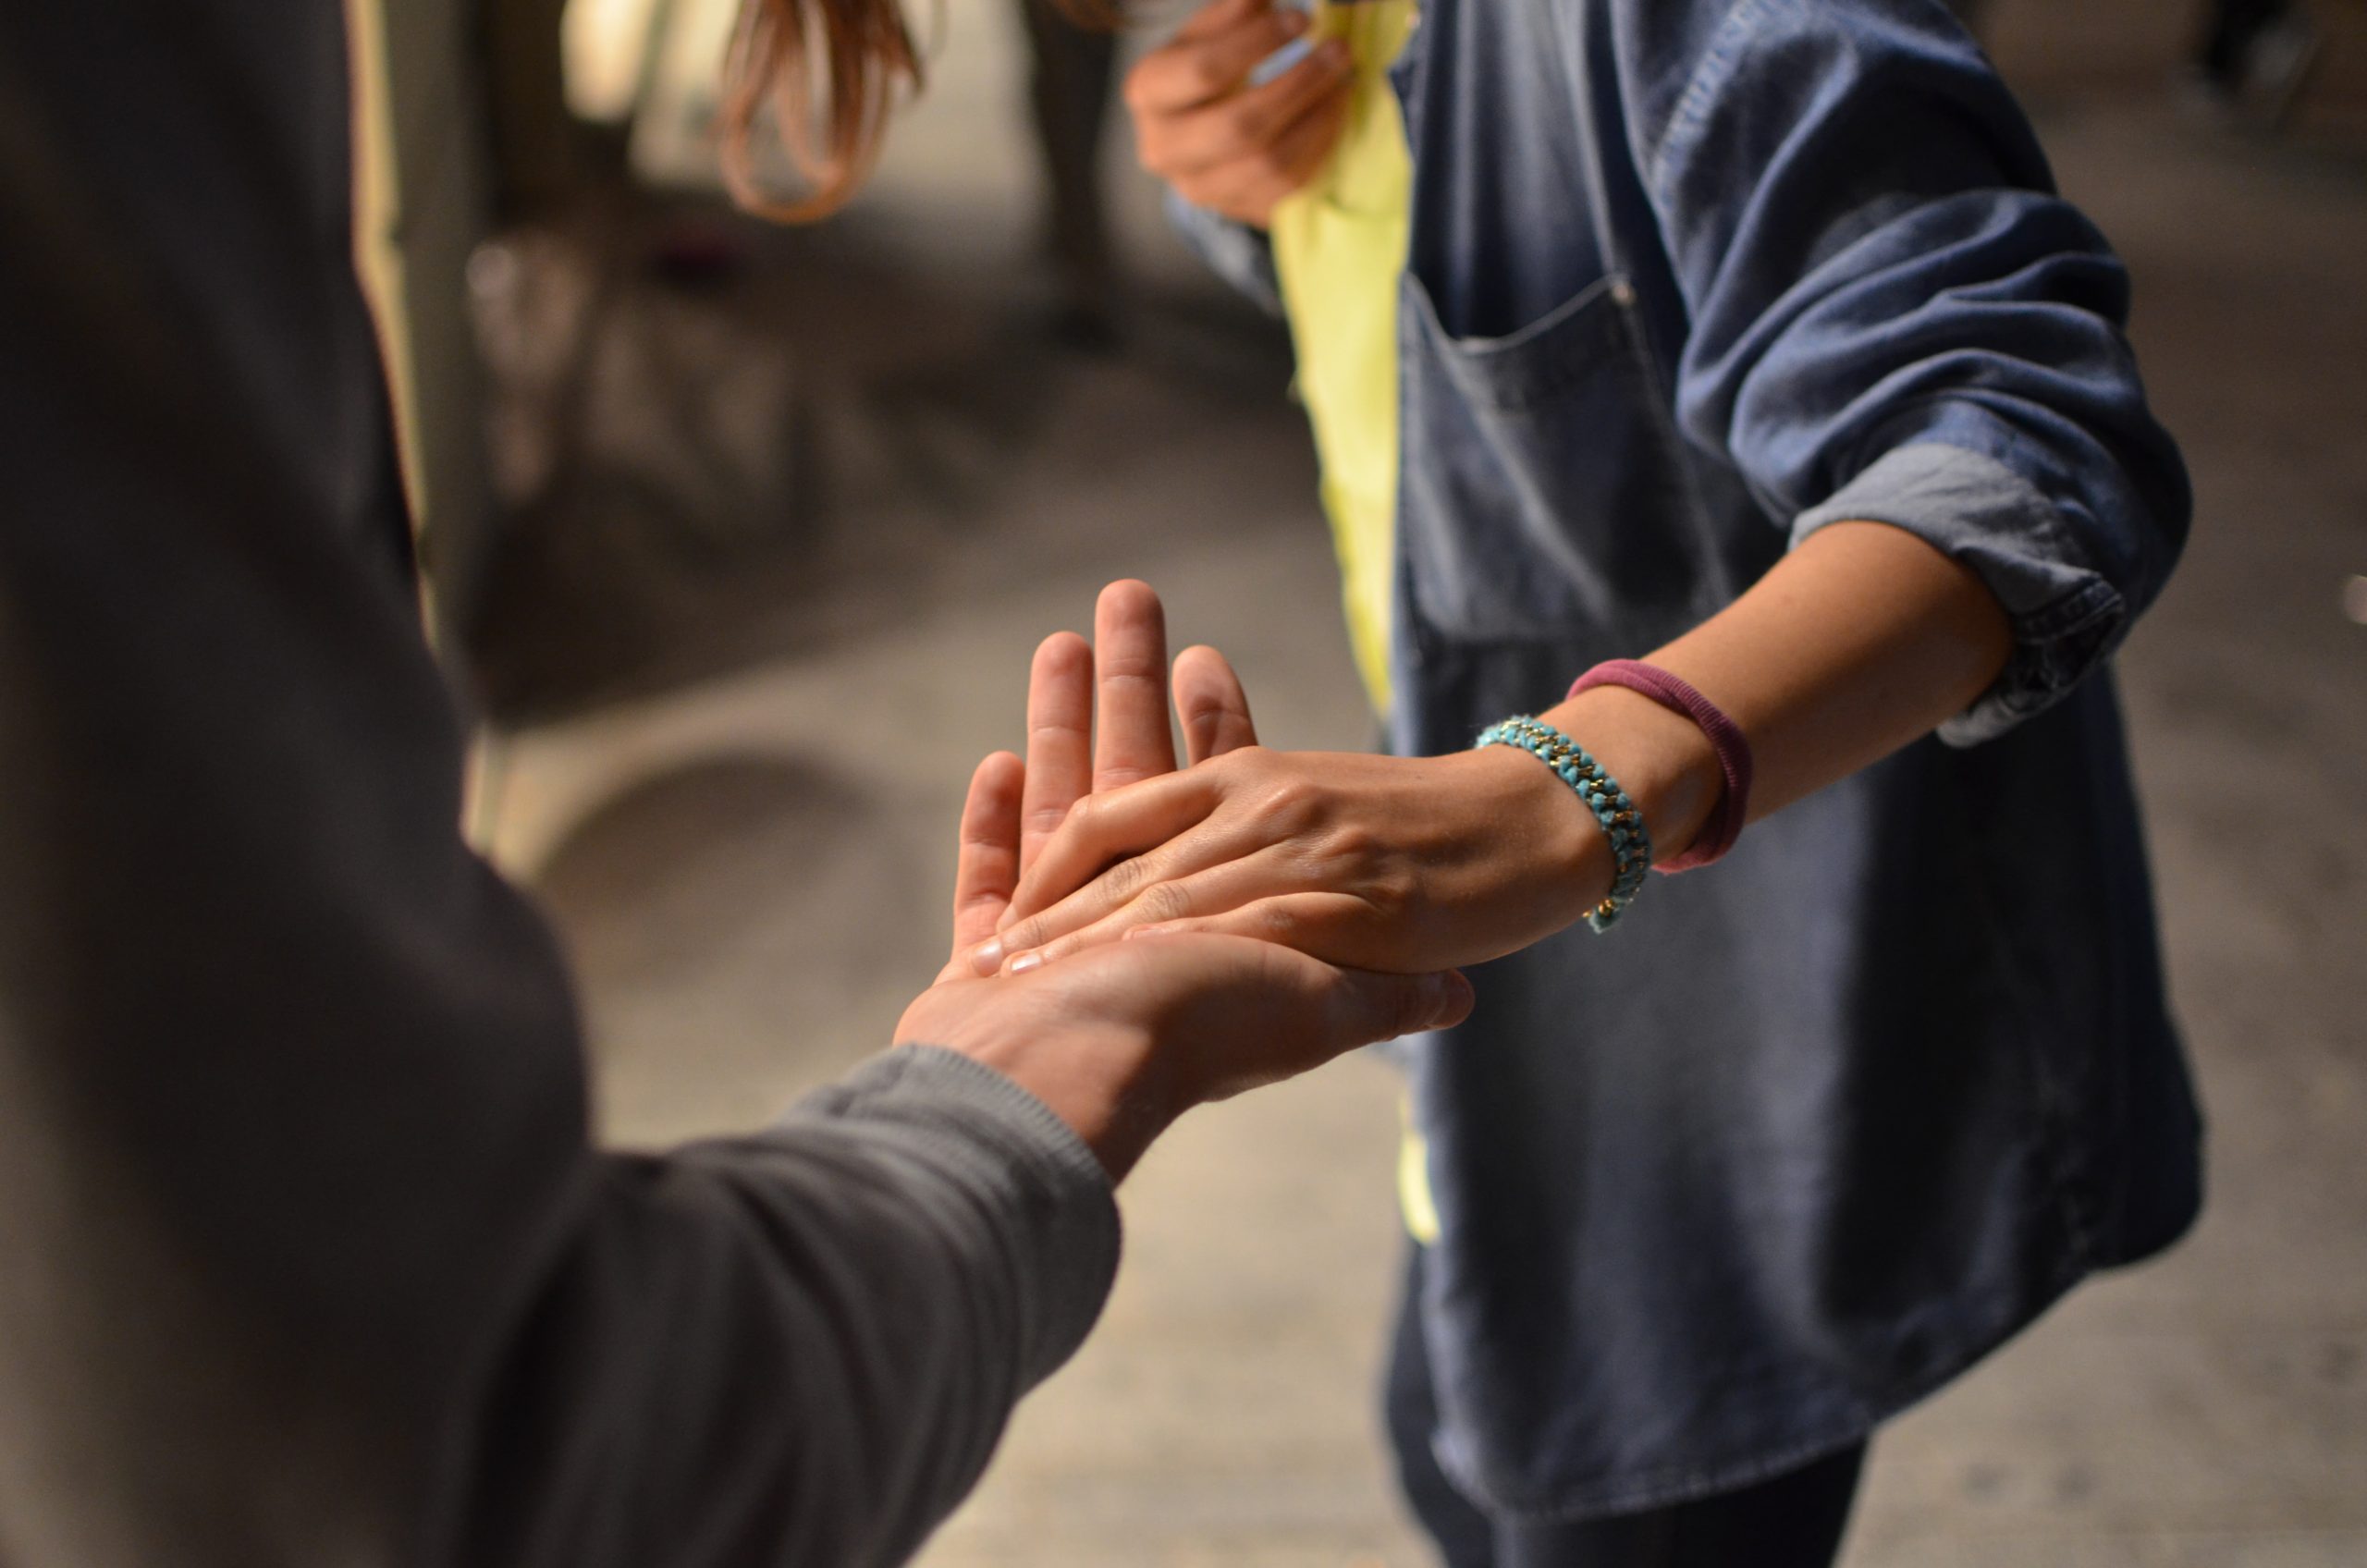 Holding helping hands - Post traumatic stress disorder treatment